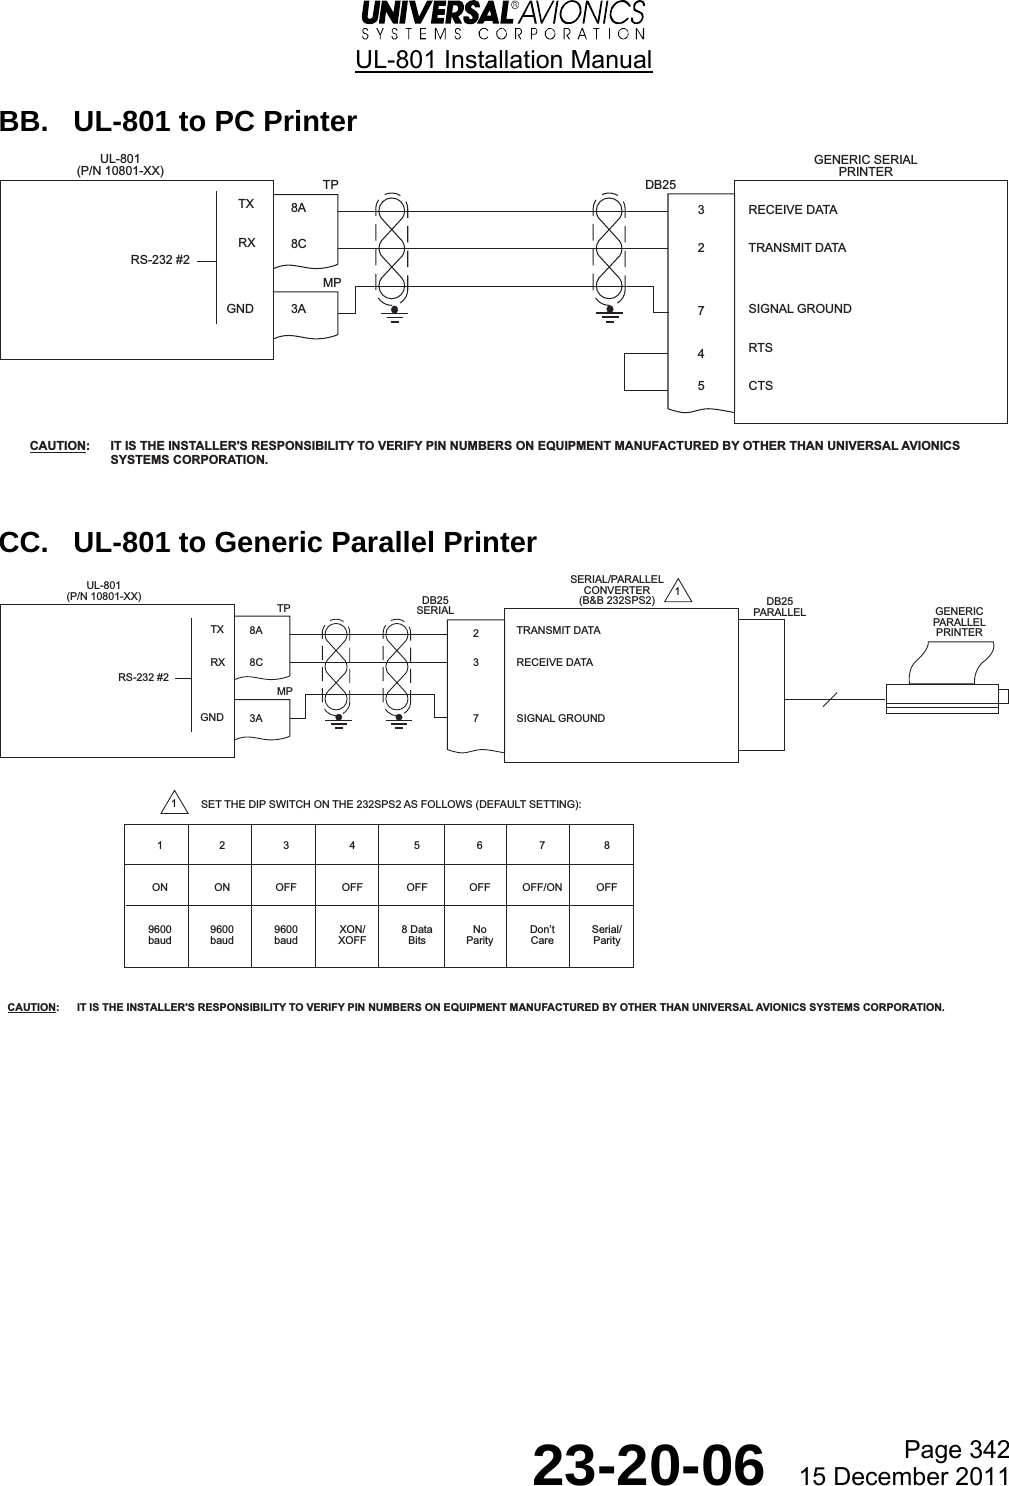  UL-801 Installation Manual  Page 342  23-20-06  15 December 2011  BB.  UL-801 to PC Printer   CC.  UL-801 to Generic Parallel Printer   8A 3 RECEIVE DATA8C 2 TRANSMIT DATA3A 7SIGNAL GROUNDTPUL-801(P/N 10801-XX) GENERIC SERIALPRINTERMPDB254RTS5 CTSCAUTION:  IT IS THE INSTALLER&apos;S RESPONSIBILITY TO VERIFY PIN NUMBERS ON EQUIPMENT MANUFACTURED BY OTHER THAN UNIVERSAL AVIONICS SYSTEMS CORPORATION.TXRS-232 #2RXGND8A 2TRANSMIT DATA8C 3 RECEIVE DATA3A 7 SIGNAL GROUNDTPUL-801(P/N 10801-XX)SERIAL/PARALLELCONVERTER(B&amp;B 232SPS2)MPDB25SERIAL DB25PARALLEL GENERICPARALLELPRINTER11ON9600baud2ON9600baud3OFF9600baud4OFFXON/XOFF5OFF8 DataBits6OFFNoParity7OFF/ONDontCare8OFFSerial/Parity1SET THE DIP SWITCH ON THE 232SPS2 AS FOLLOWS (DEFAULT SETTING):CAUTION:  IT IS THE INSTALLER&apos;S RESPONSIBILITY TO VERIFY PIN NUMBERS ON EQUIPMENT MANUFACTURED BY OTHER THAN UNIVERSAL AVIONICS SYSTEMS CORPORATION.TXRS-232 #2RXGND